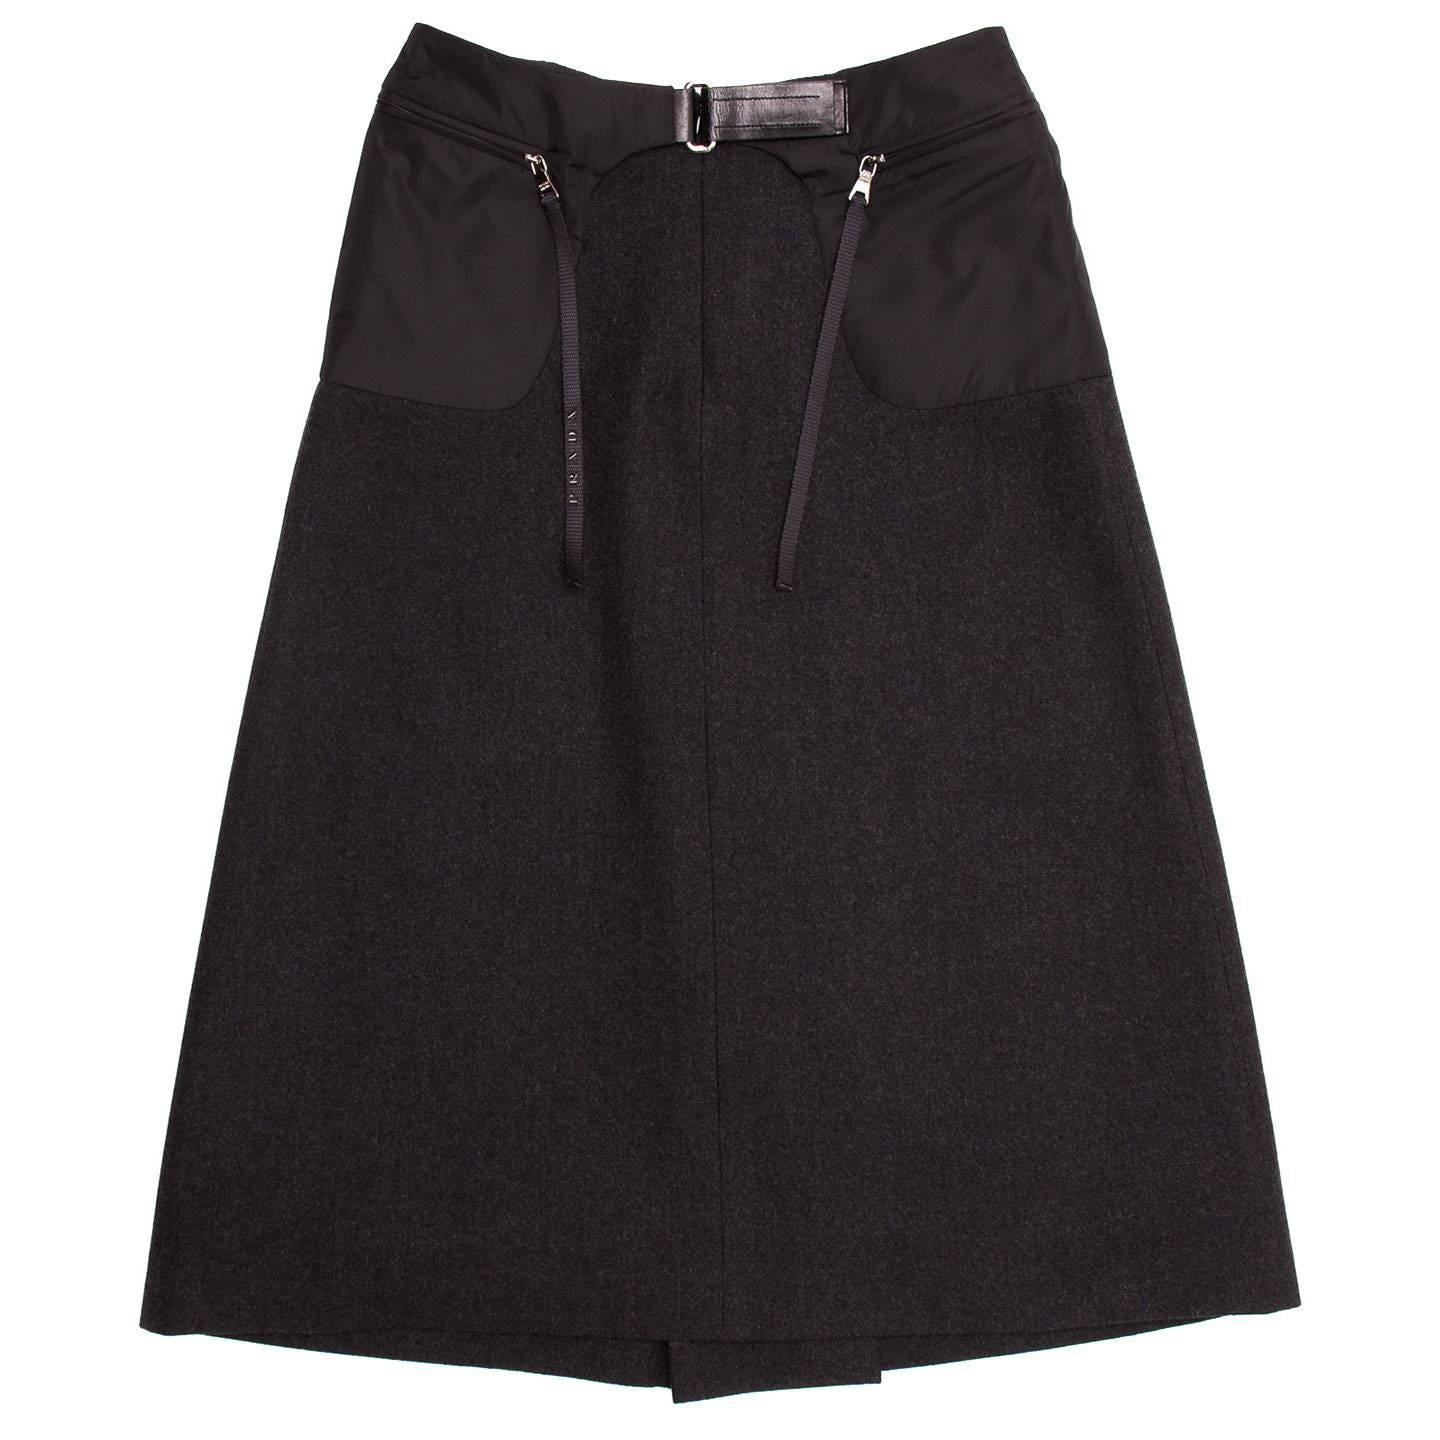 Prada Charcoal grey wool A-line skirt with black nylon round patch pockets on top-sides that open at front with metallic zippers adorned by dangling ribbons. The pockets join at front waist with a black leather insert that fastens with a silver